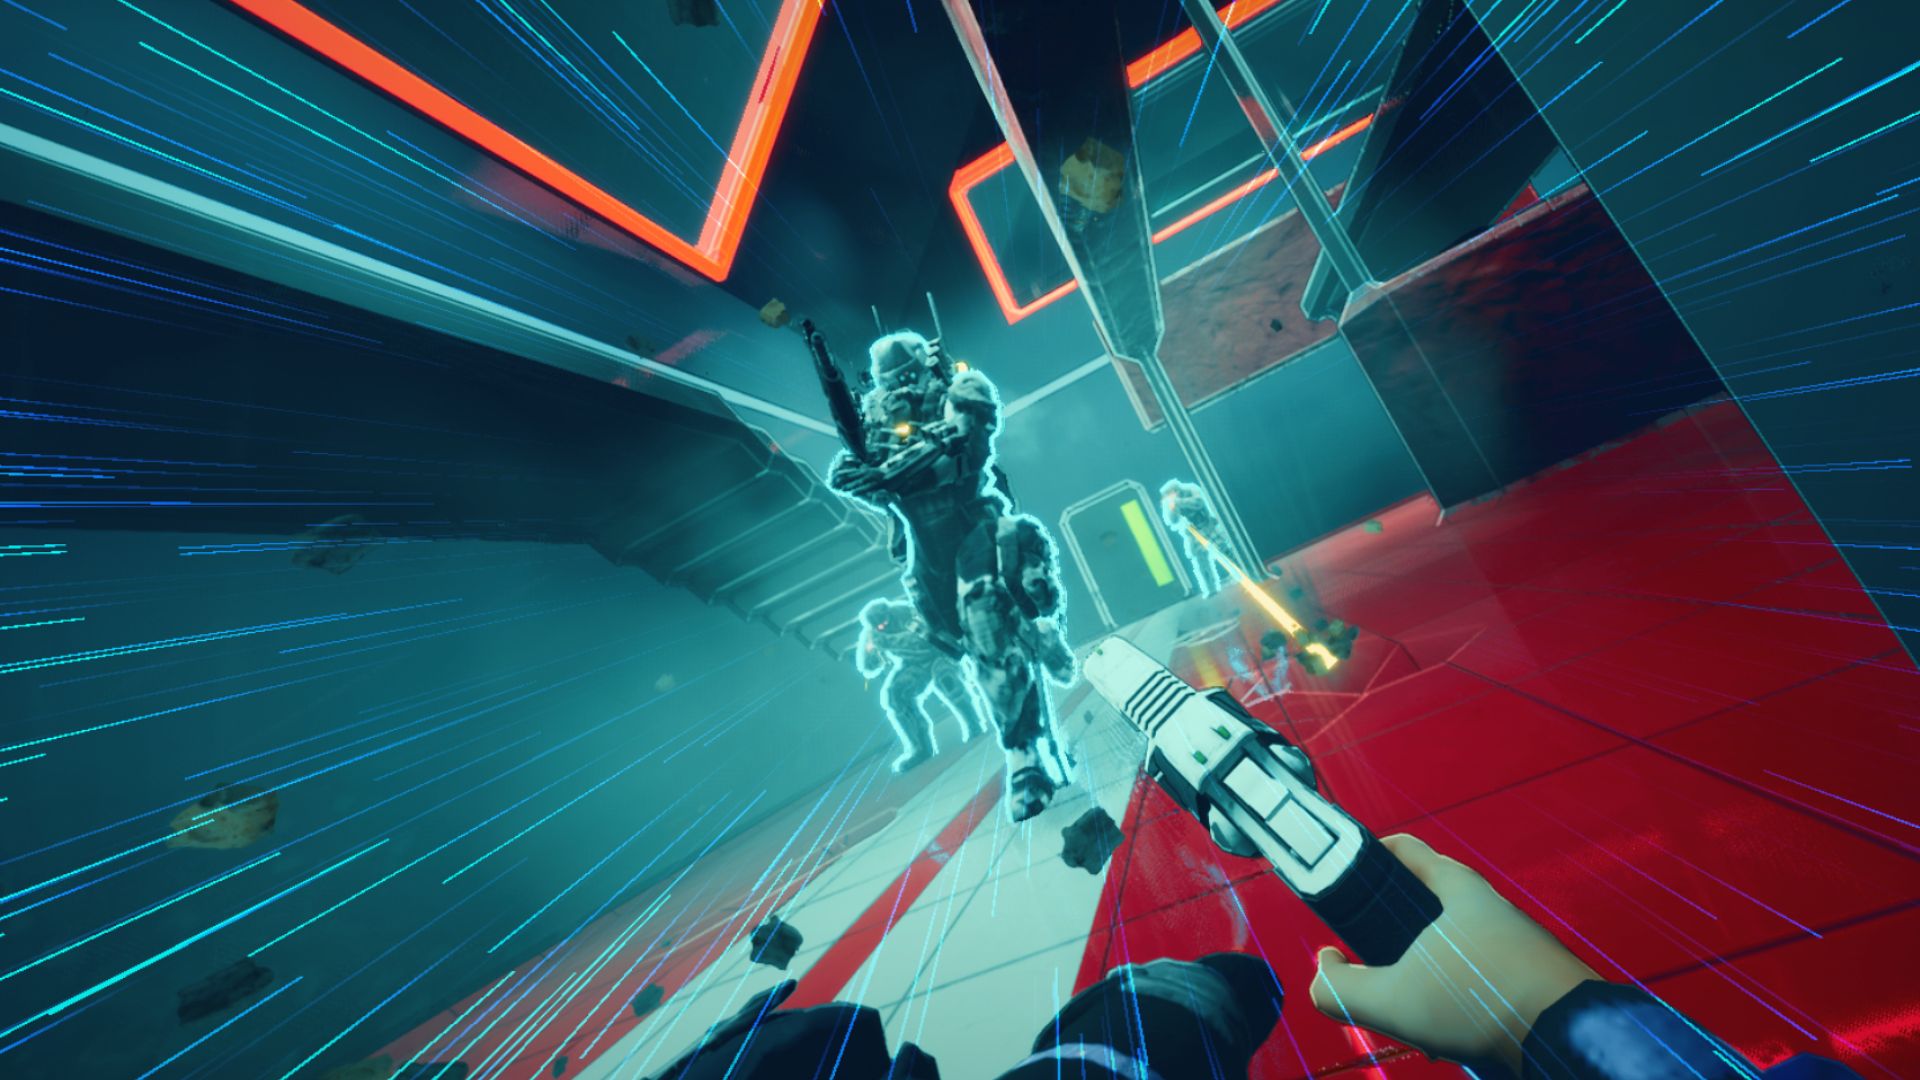 Mirror's Edge meets Titanfall 2 in FPS game's free update, 75% off